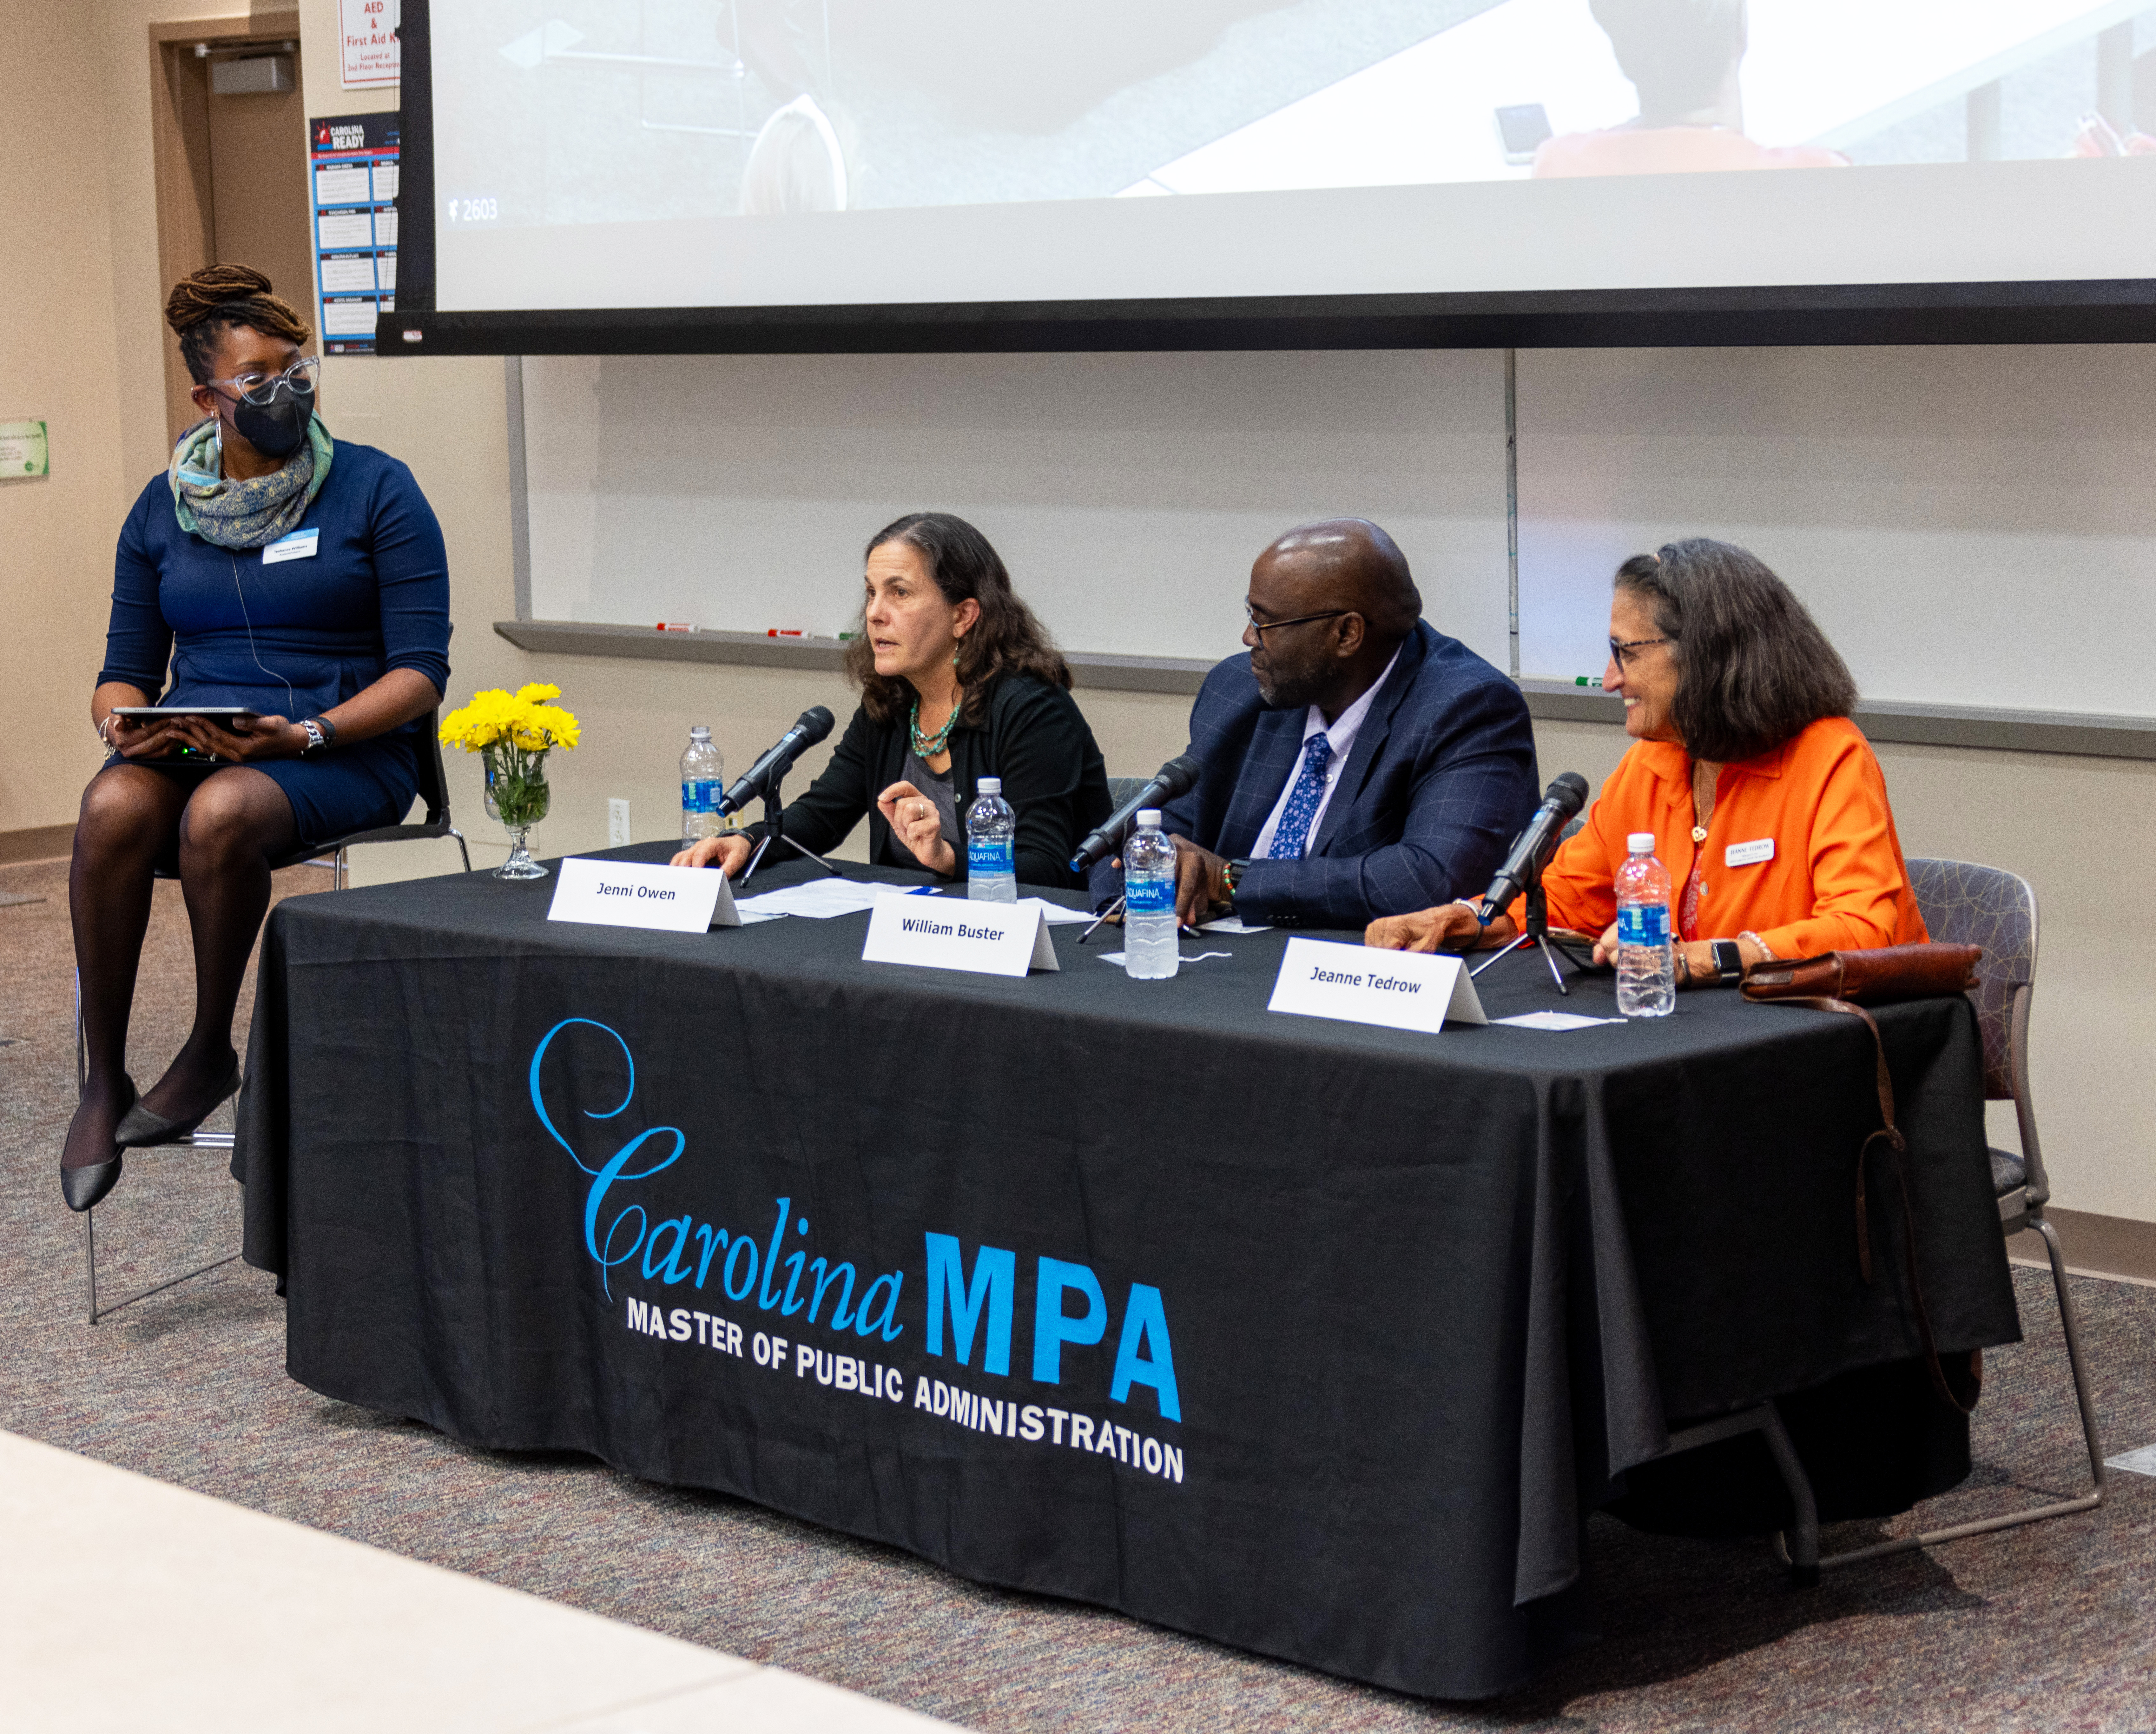 A group of 3 adults seated at a table with a banner over it that reads "Carolina MPA". One speaking into the microphone in front of her. The moderator sits in a high chair to the left of the table. 